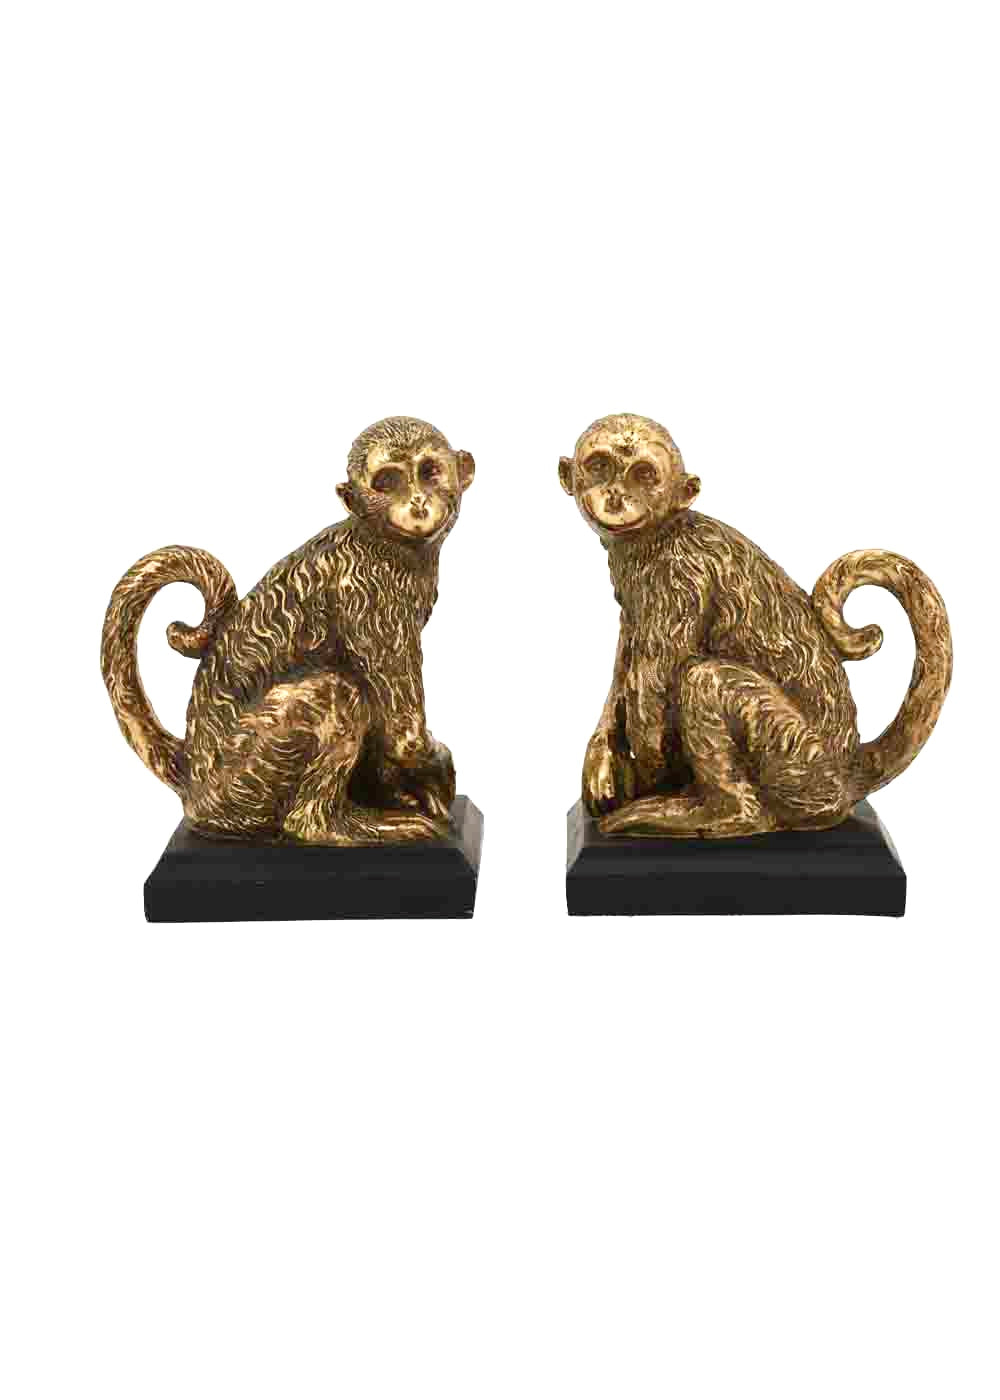 Monkey Business Book Ends